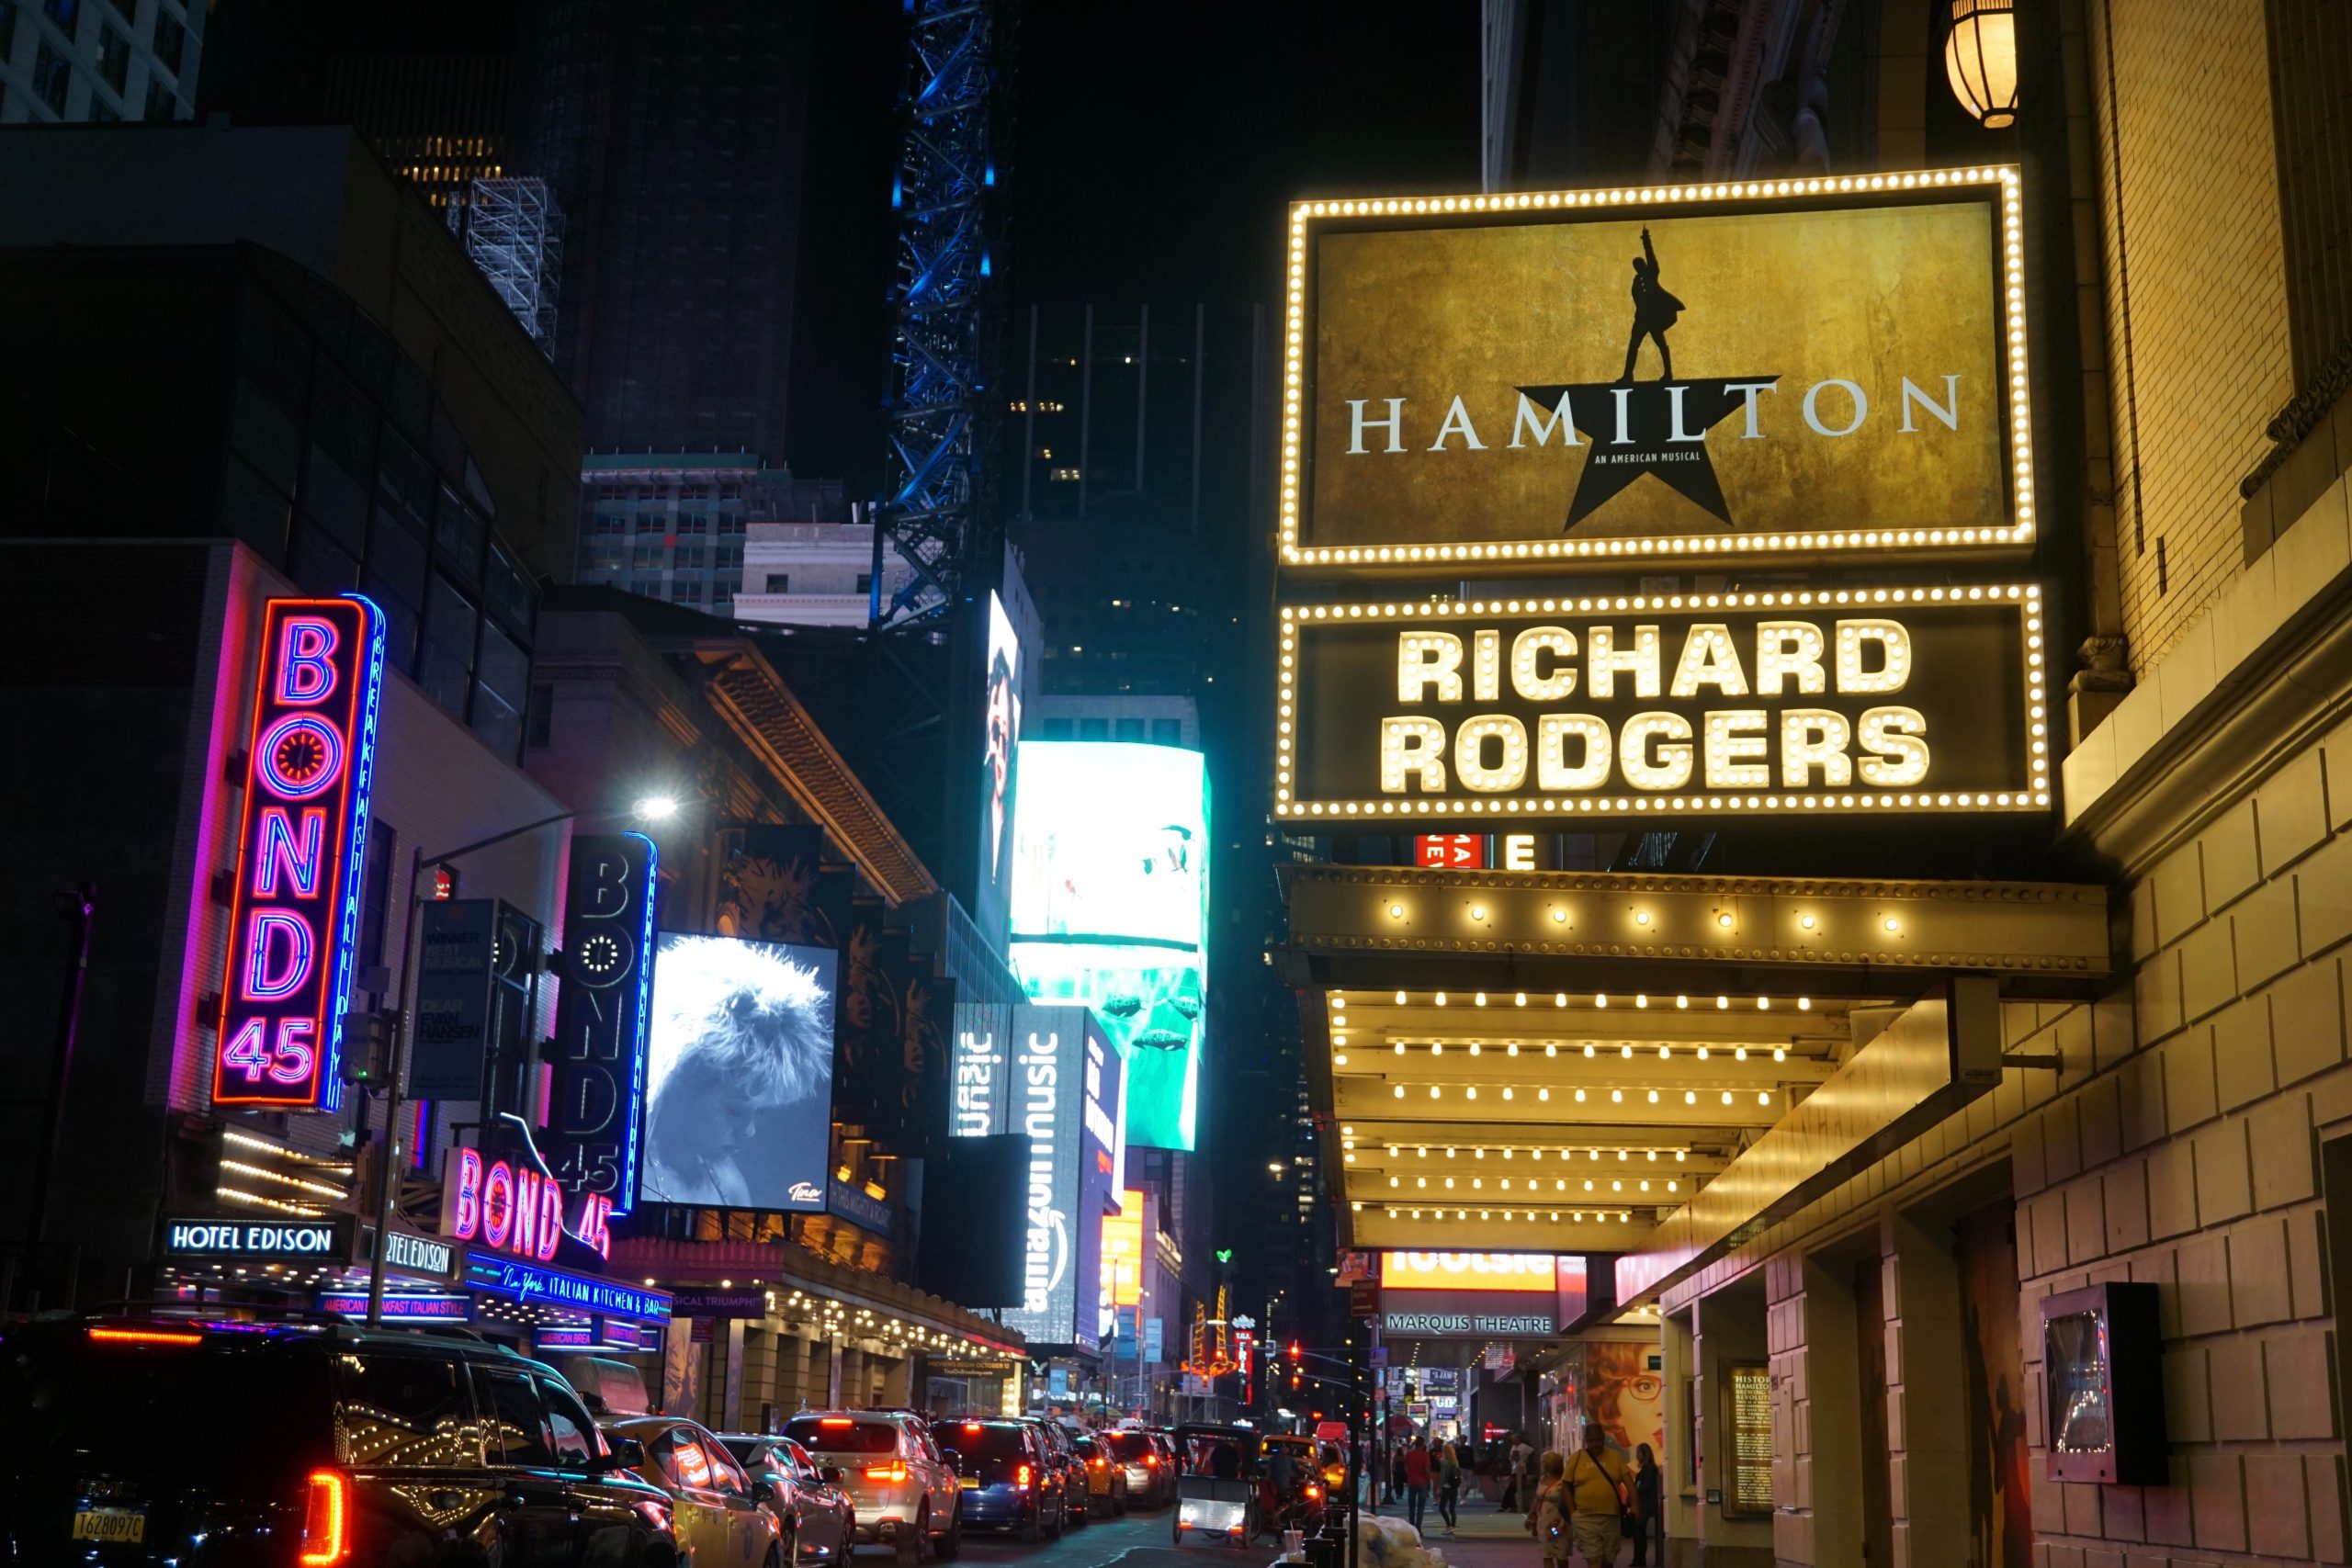 Broadway at night in New York City